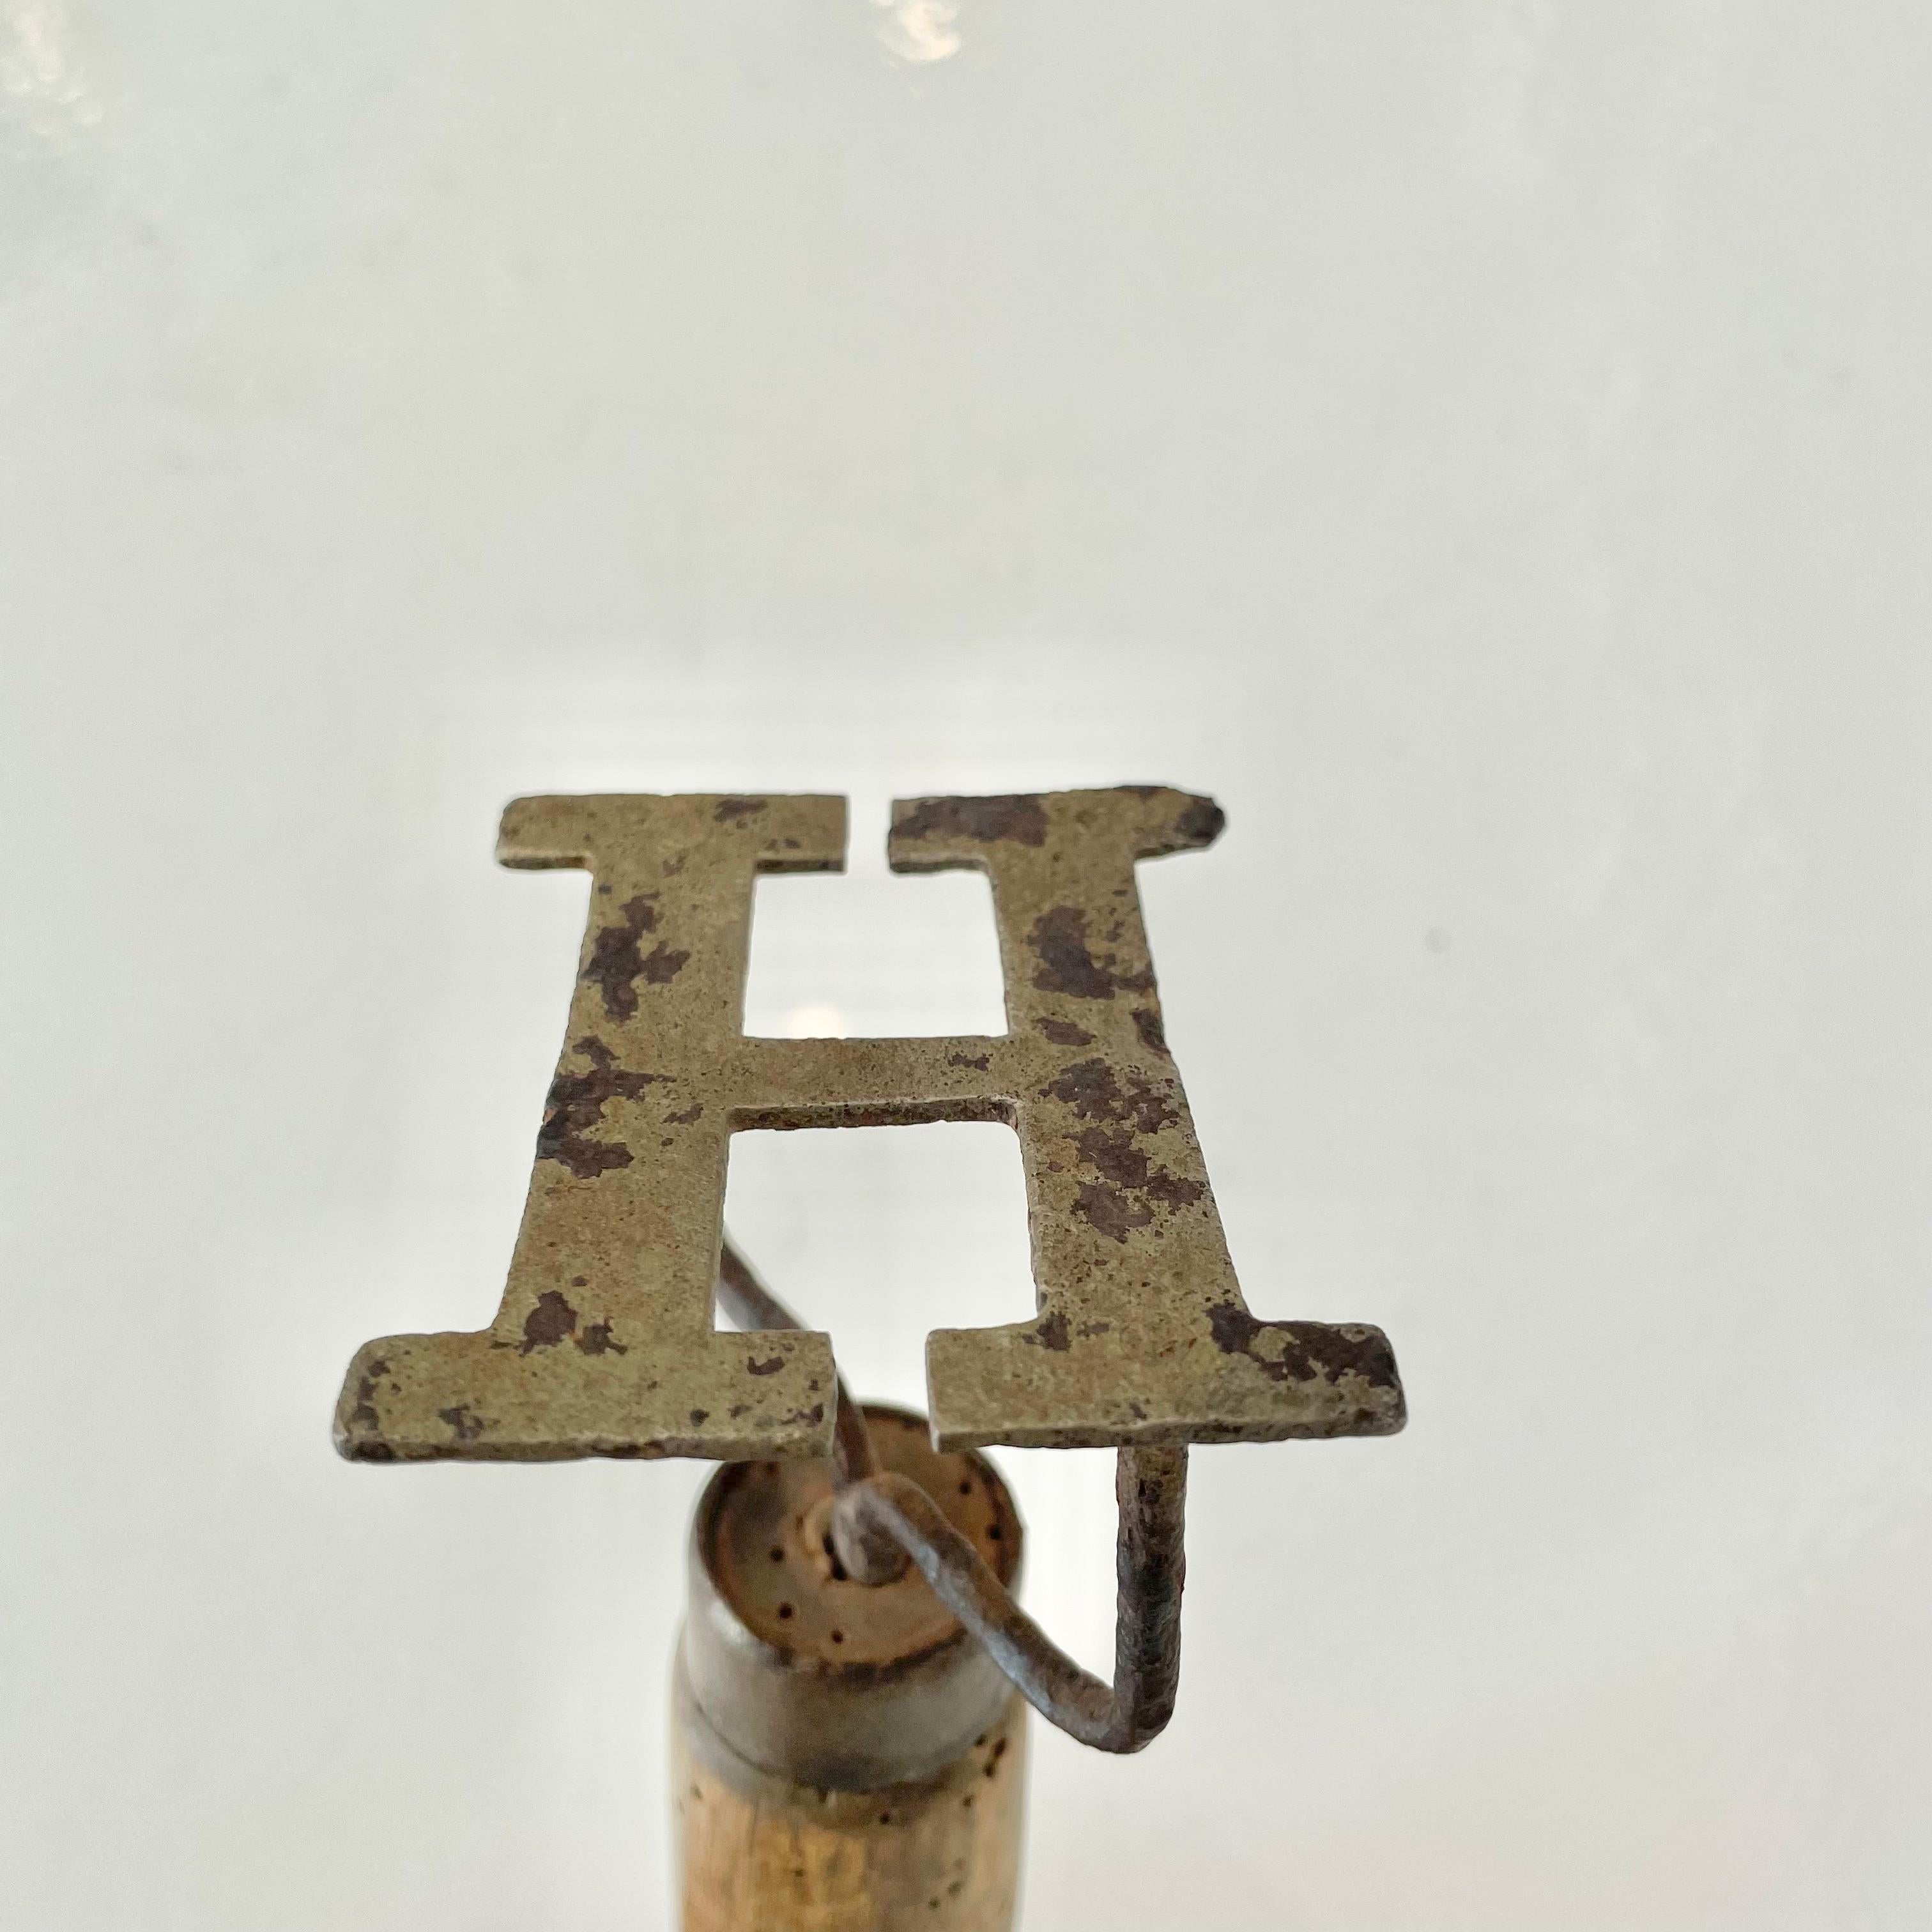 Handheld branding iron with Hermes H logo. Bought in France, likely used by ranch hands for branding hides. Unique piece that works great as desk art. Wooden handle and iron head.

 